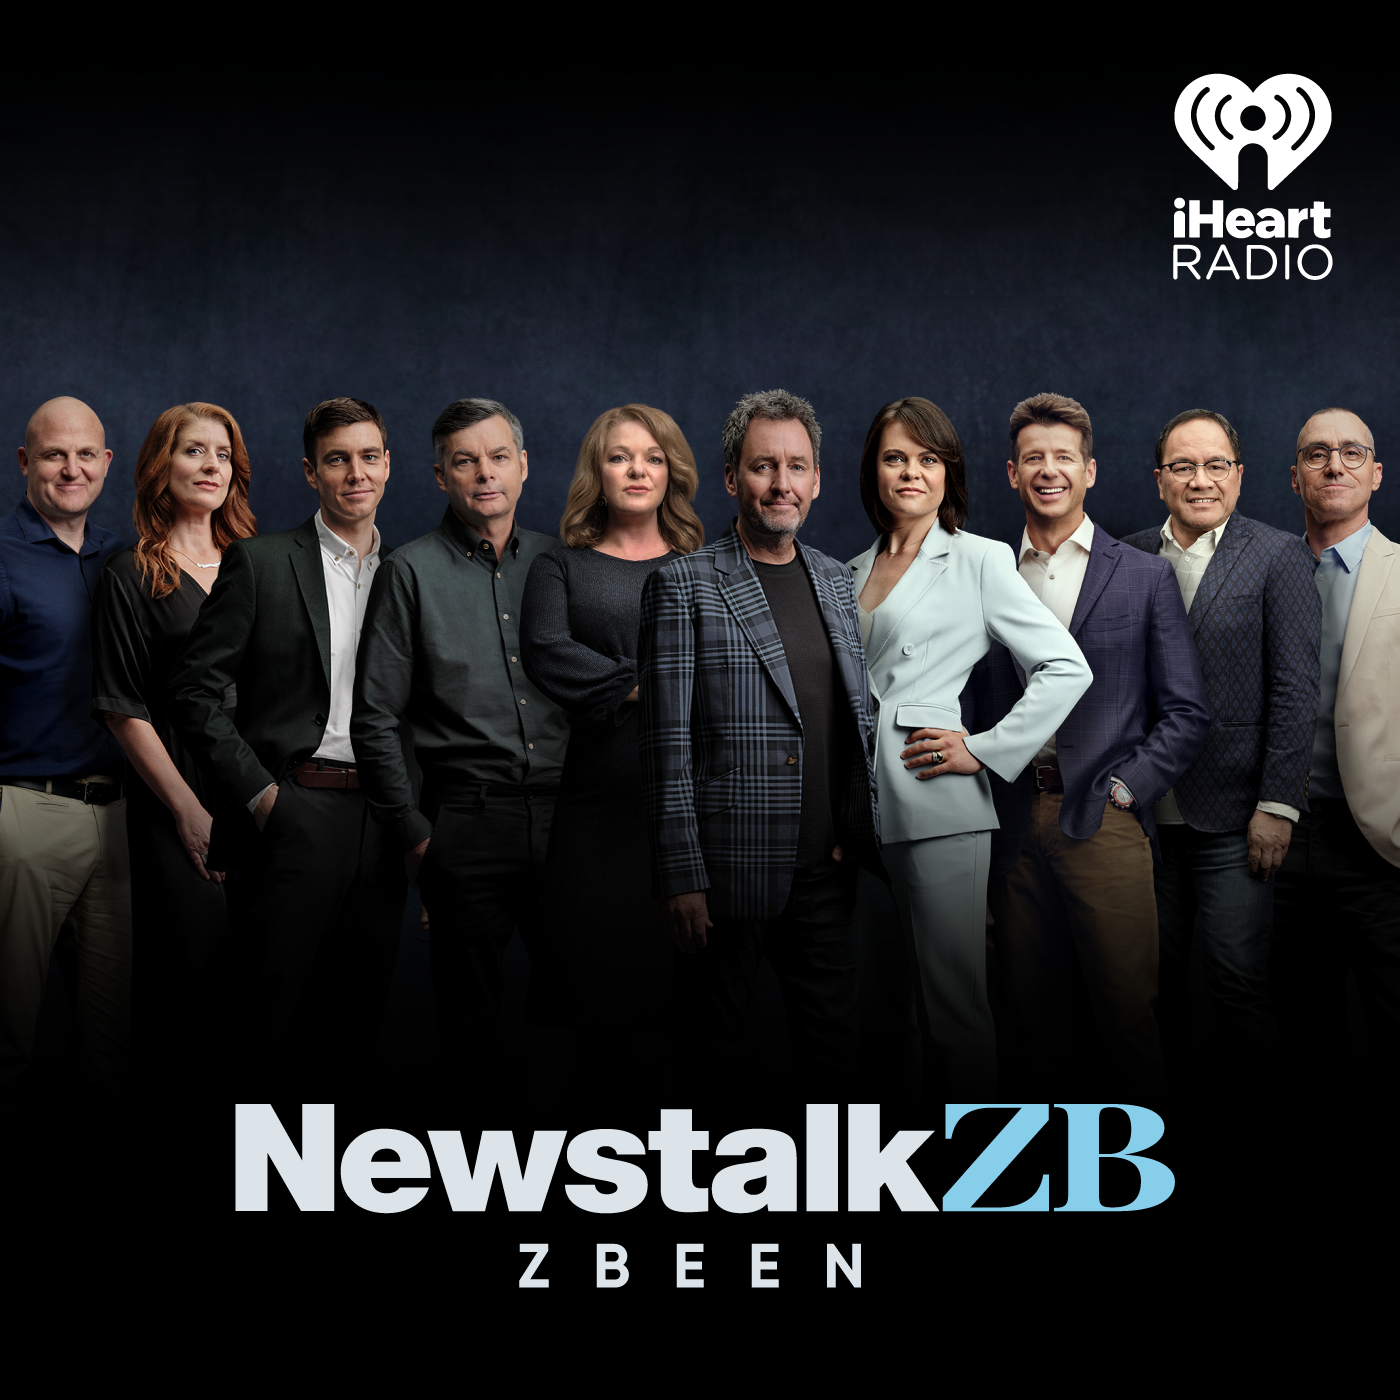 NEWSTALK ZBEEN: We Don't Know if We're Coming or Going